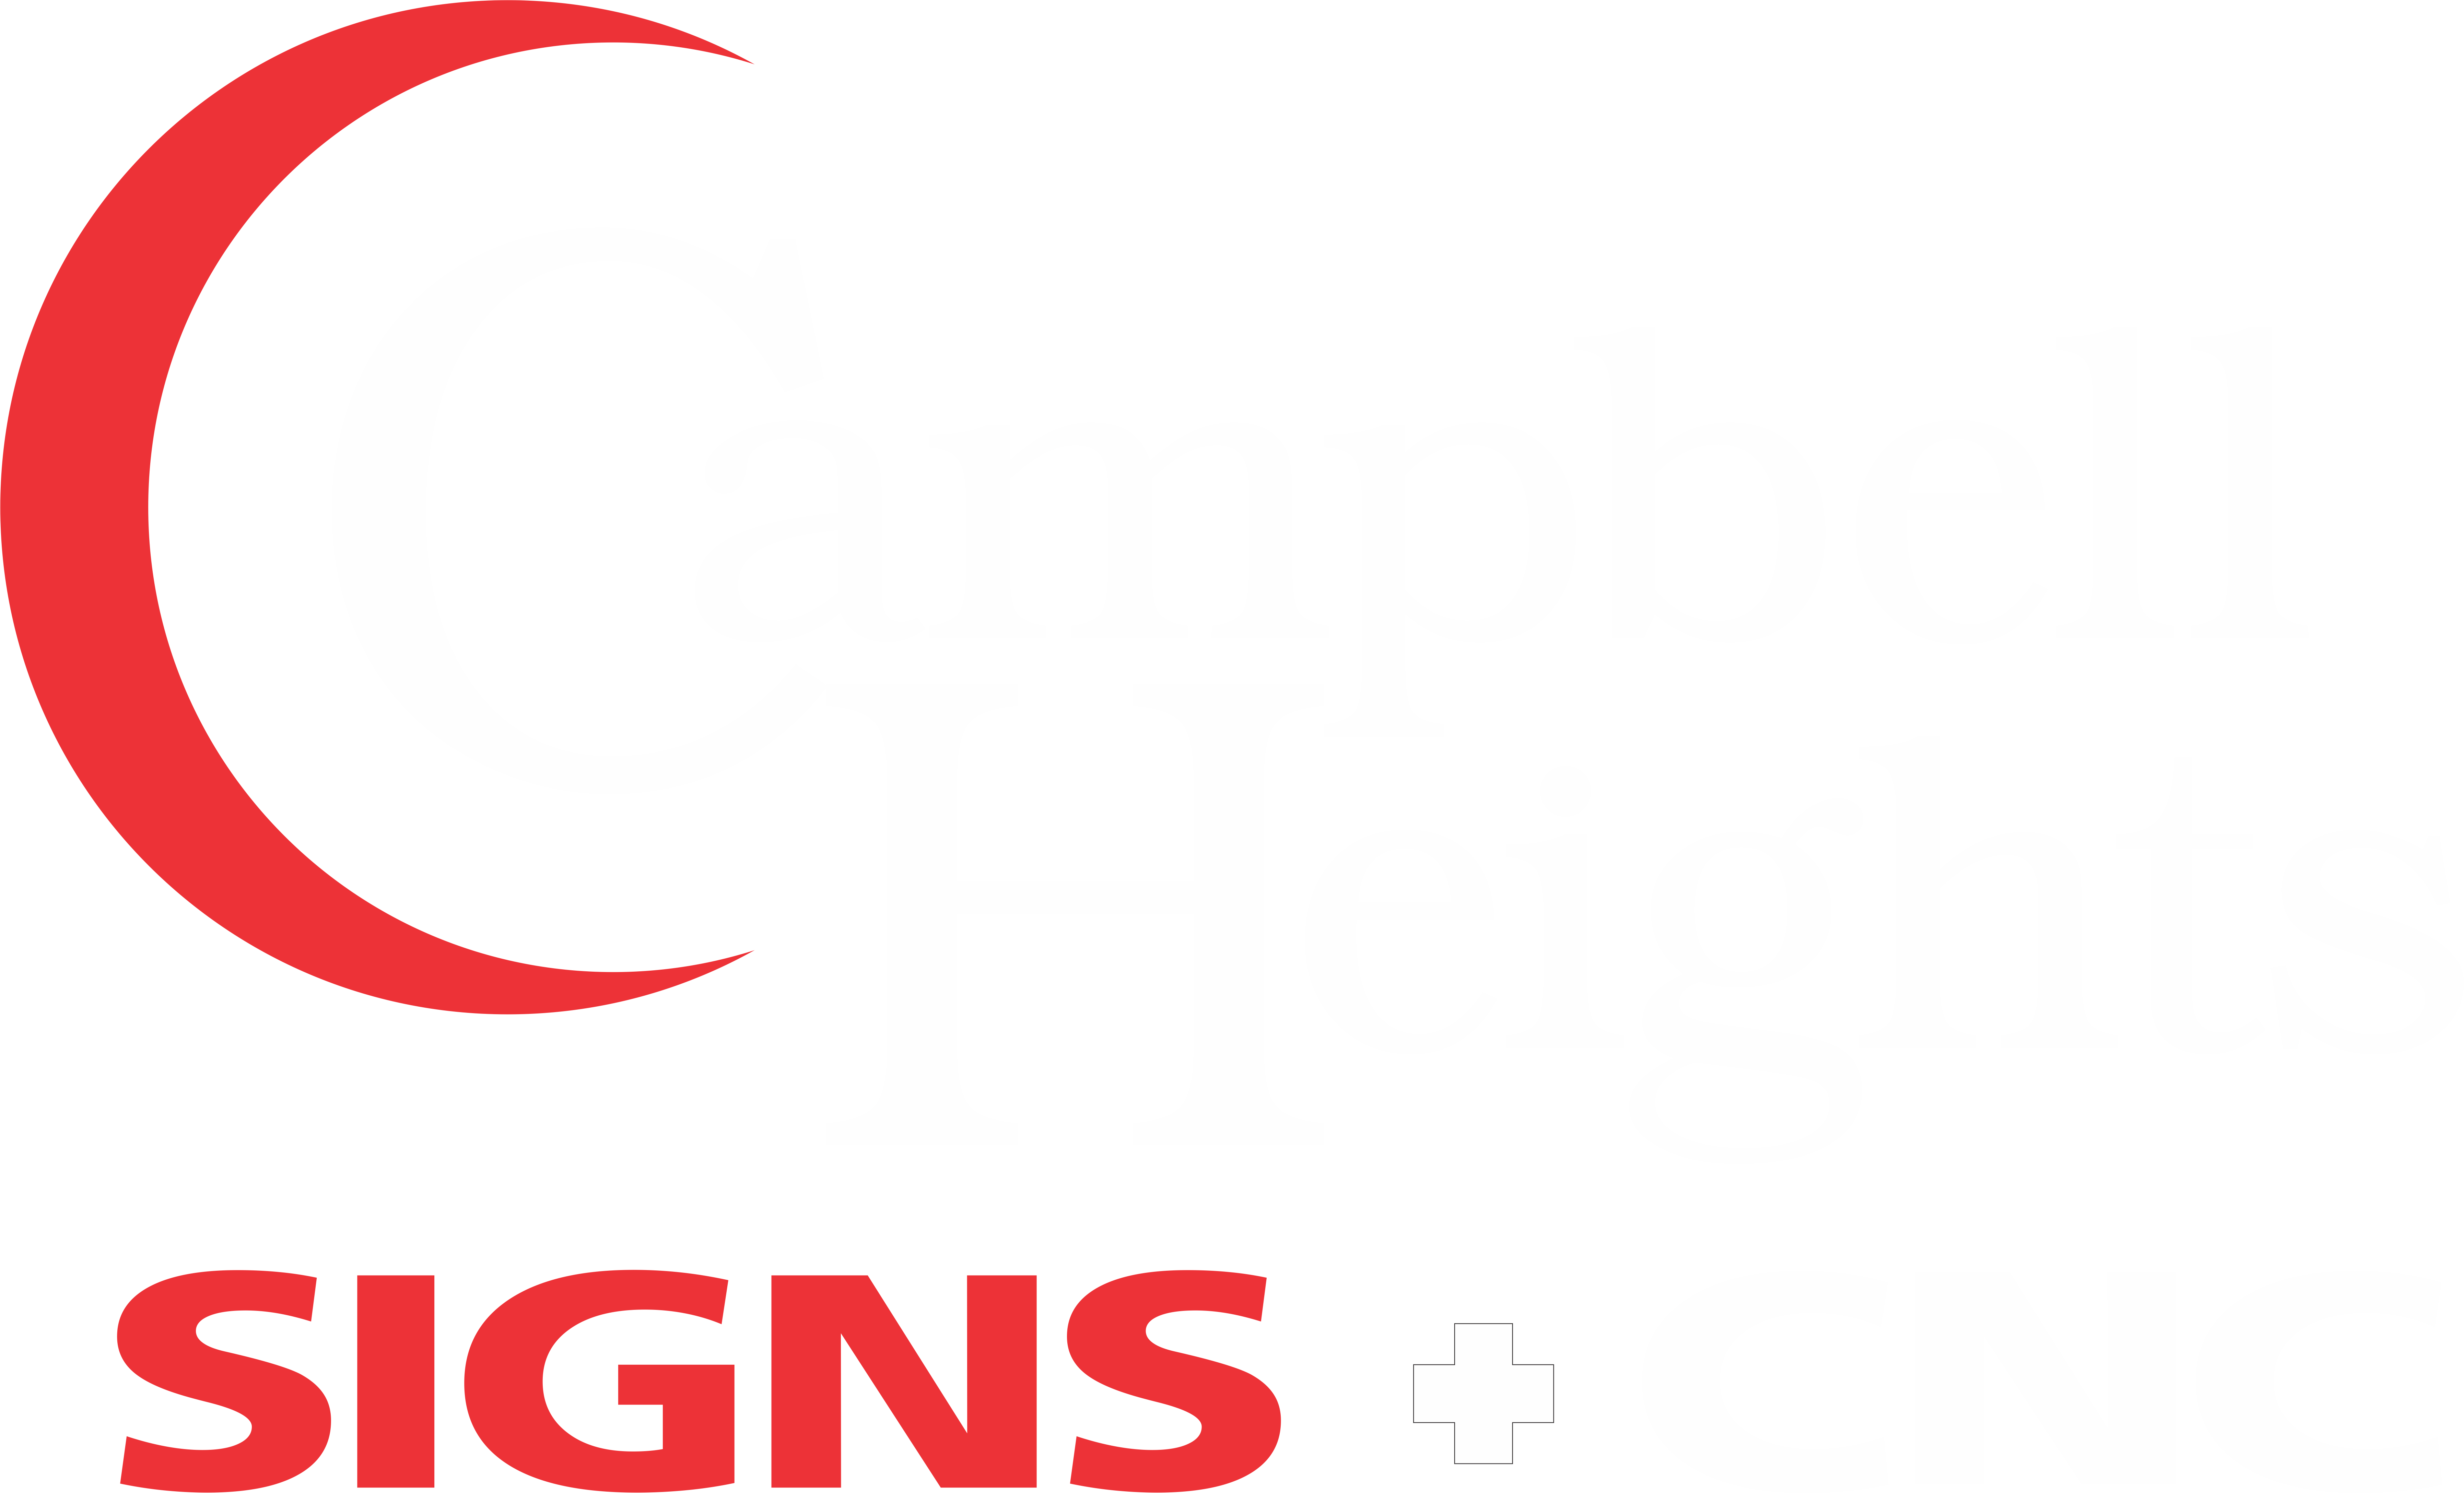 Campbell Heights Signs Plus